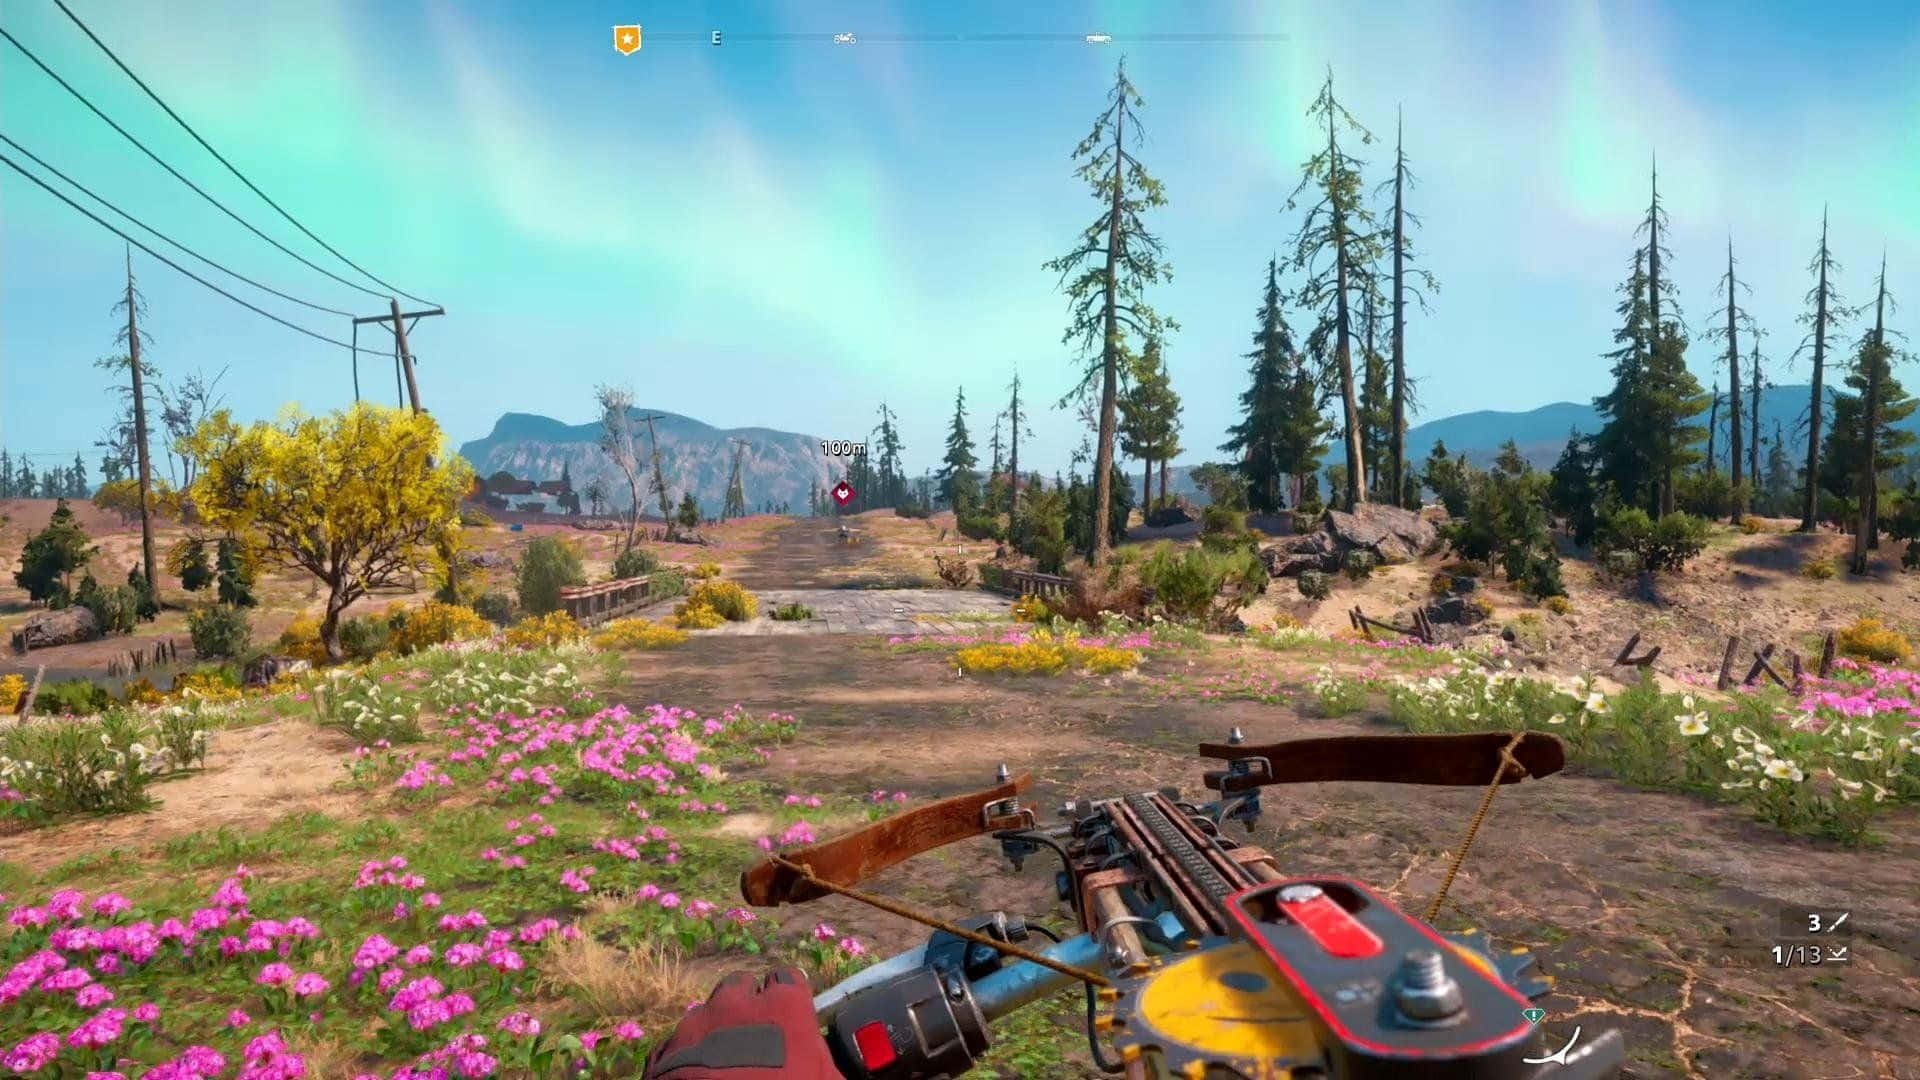 A Screenshot Of A Game With A Gun And Flowers